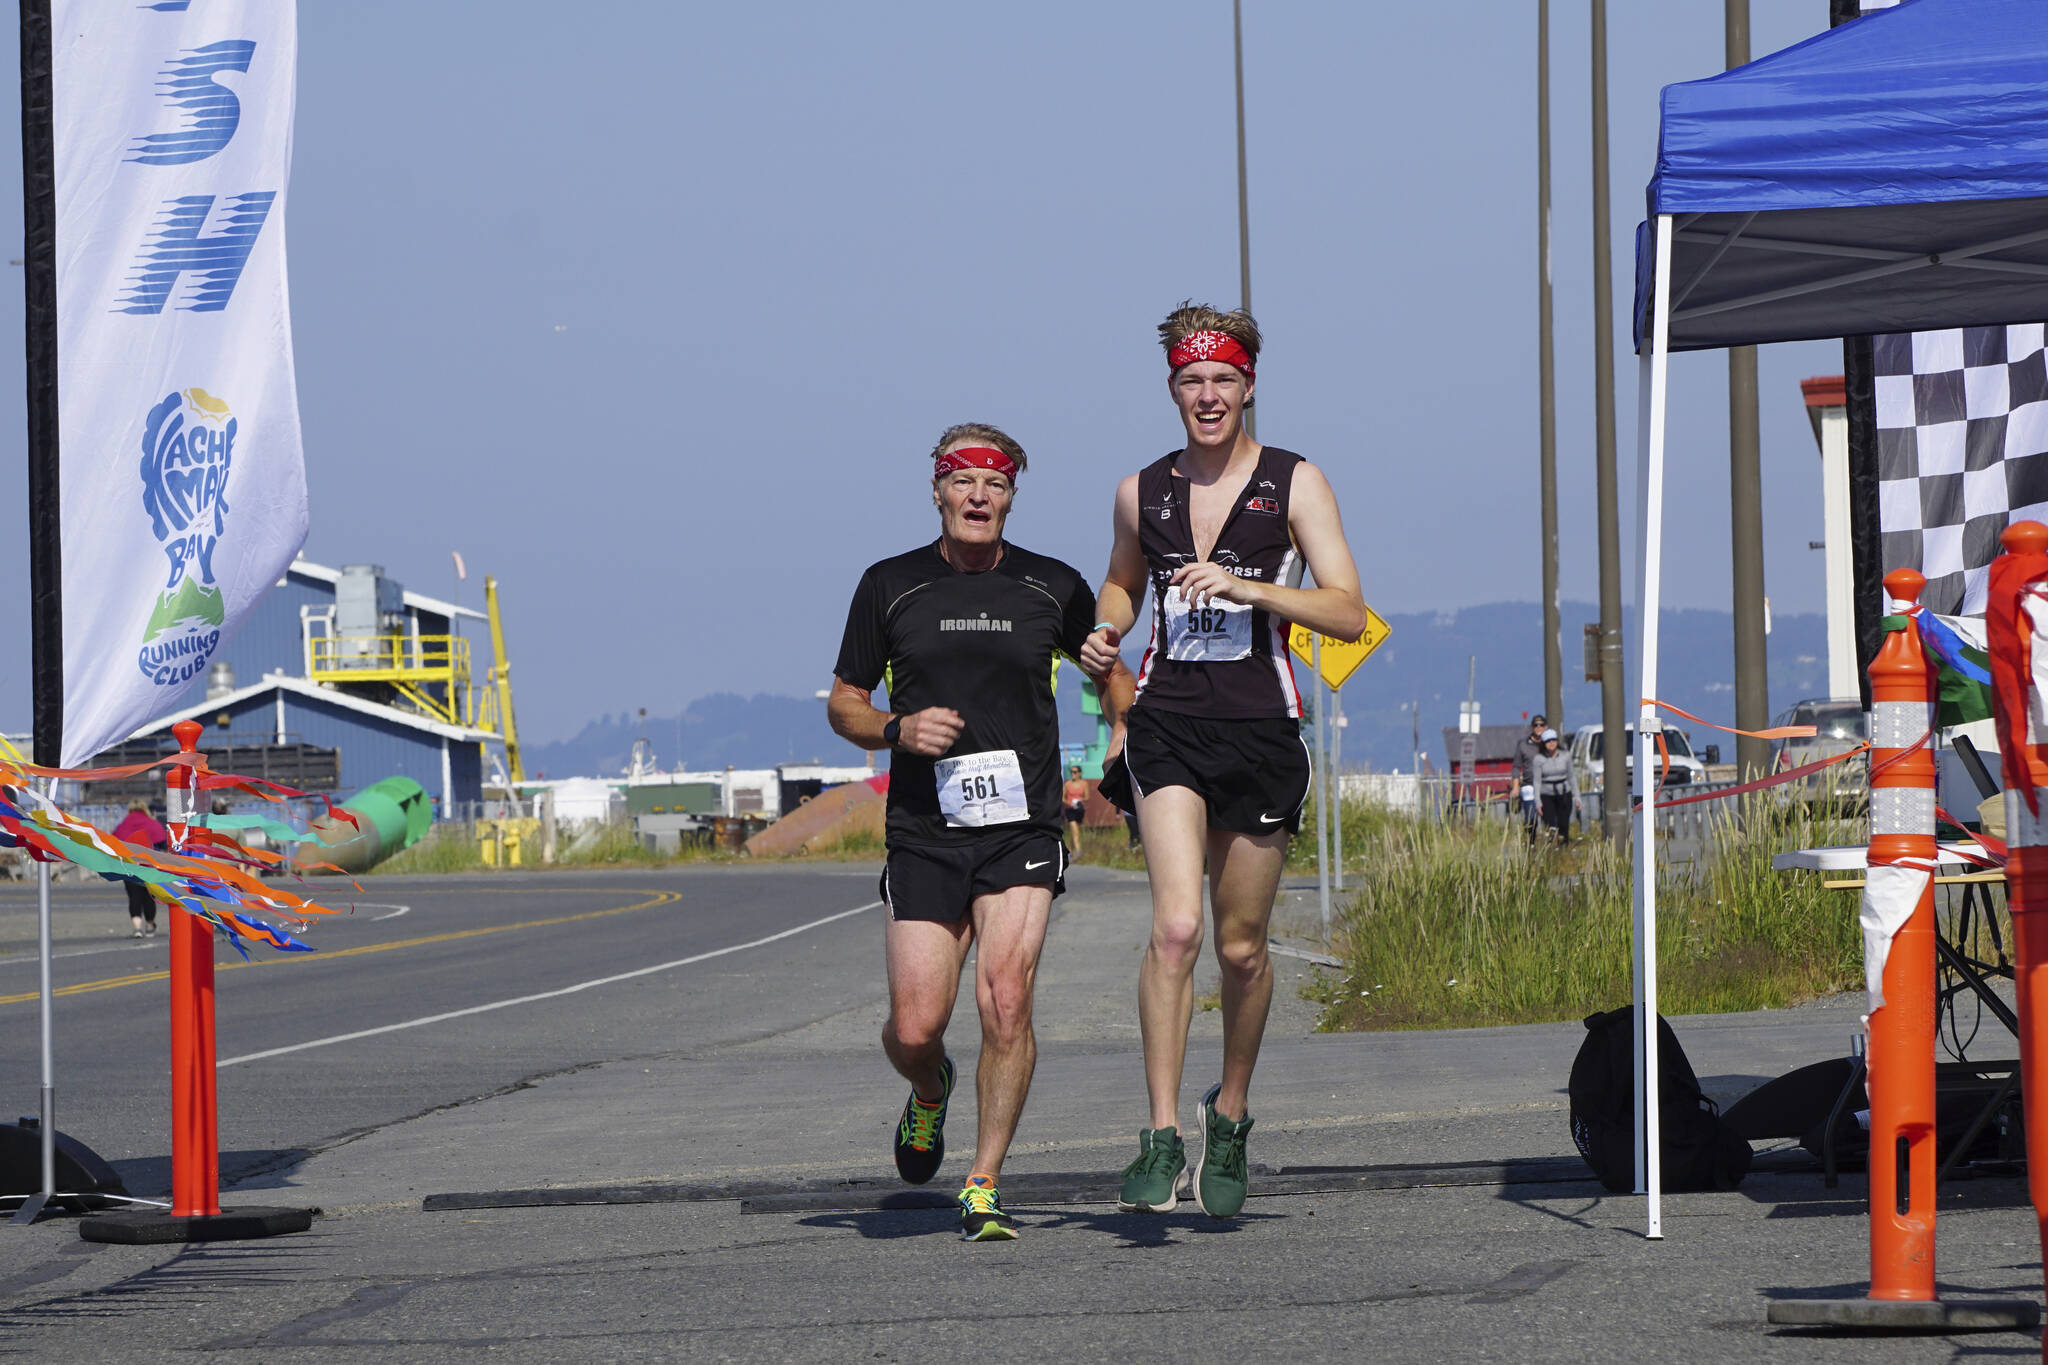 Shaun Marshall-Pryde, left, and Stirling Marshall-Pryde, right, finish together the 2022 Homer Spit Run, on Saturday, June 25, 2022, at the End of the Road Park in Homer, Alaska. (Photo by Michael Armstrong/Homer News)